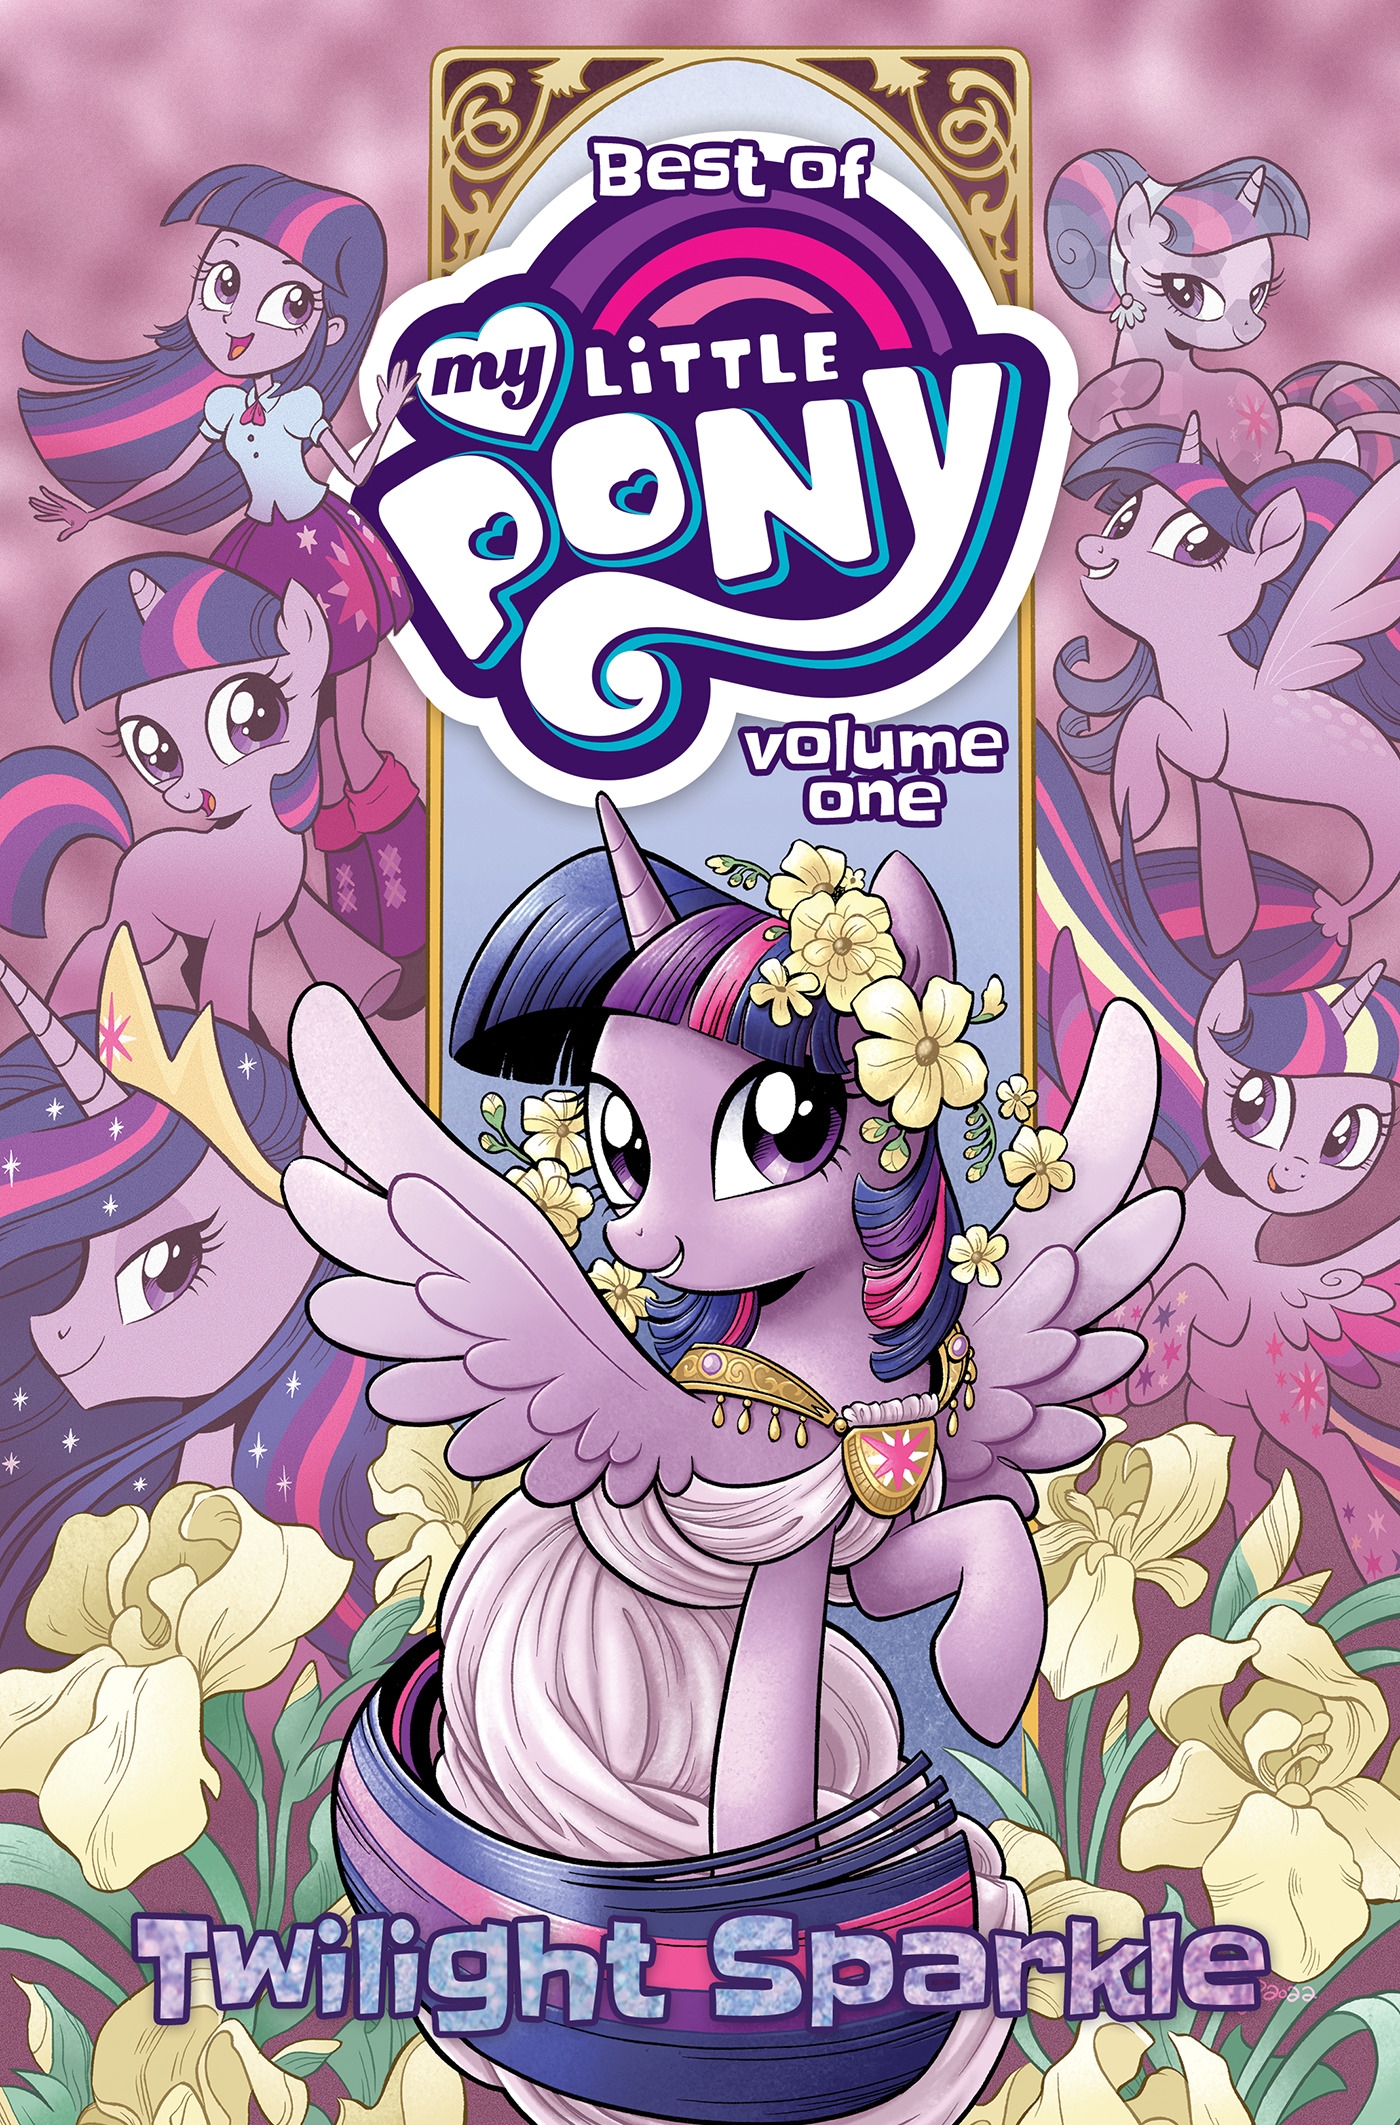 Best of My Little Pony, Vol. 1: Twilight Sparkle by Katie Cook